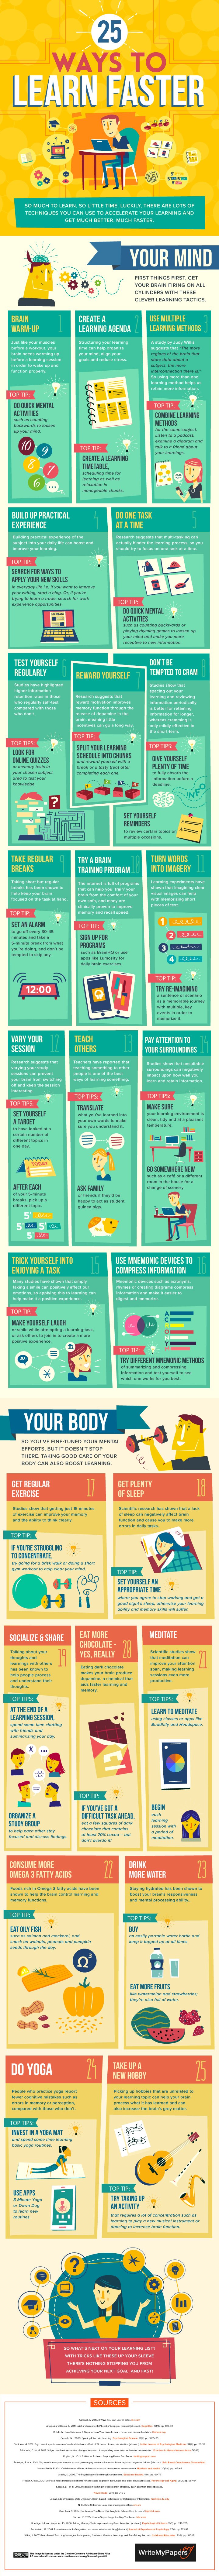 learn faster infographic